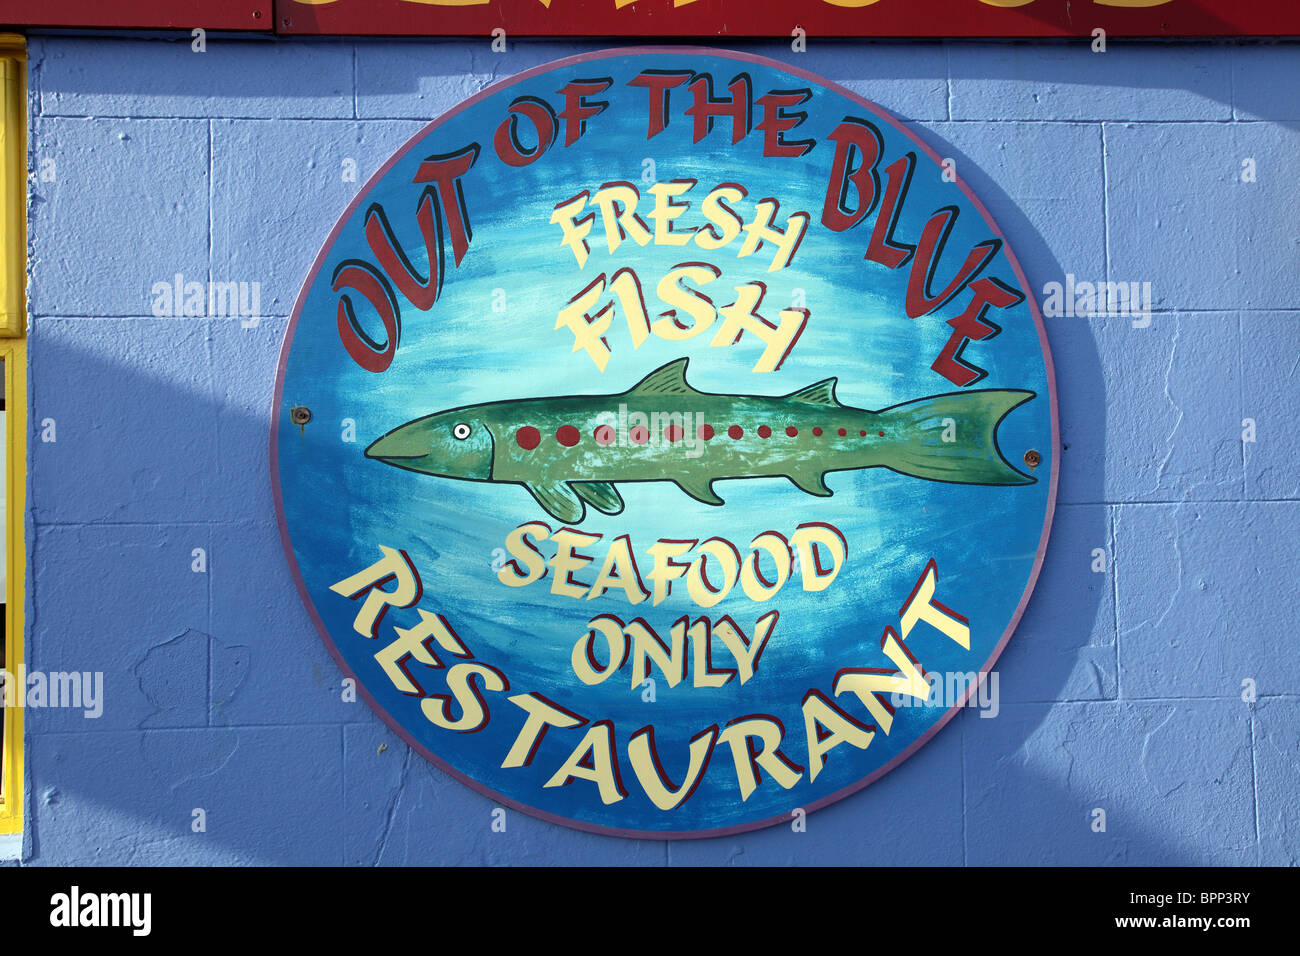 Out of the Blue Seafood nur Fisch Restaurant Schild, Dingle, County Kerry, Irland Stockfoto